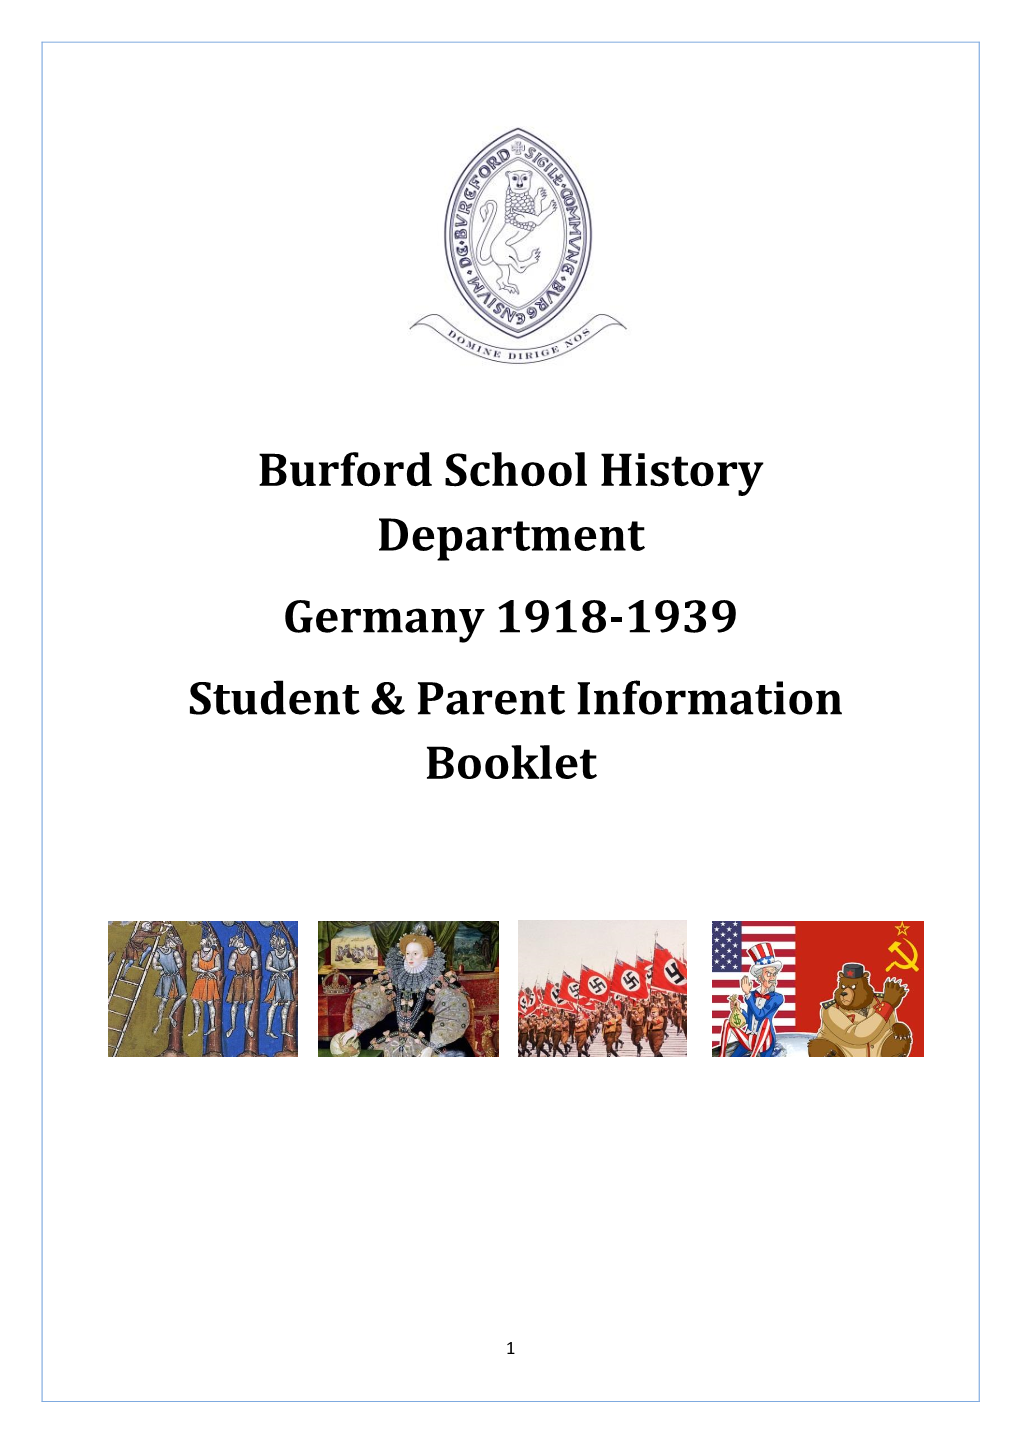 Burford School History Department Germany 1918-1939 Student & Parent Information Booklet